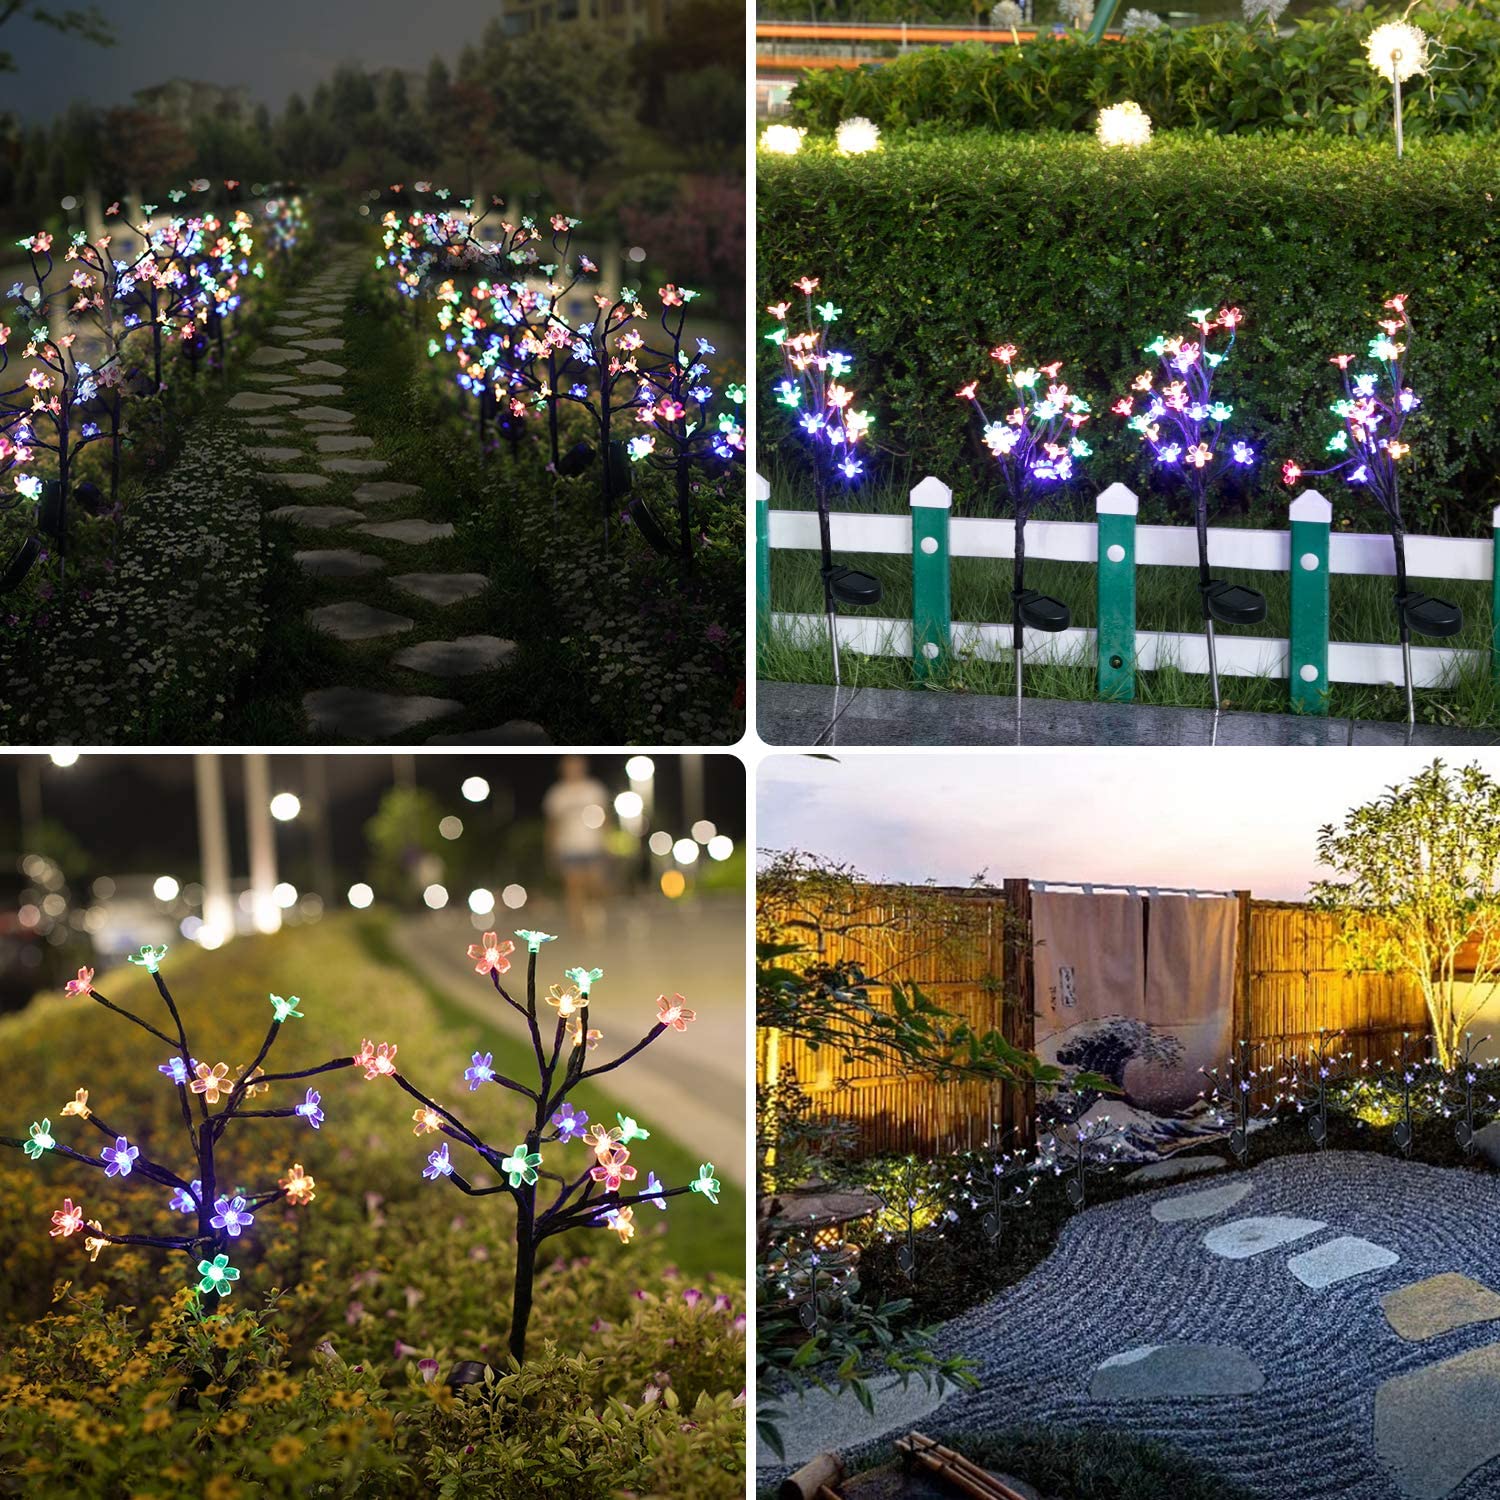 4 Pack Solar Fairy Lights Waterproof Multi-Color Solar Powered Garden Lights, Outdoor Solar Lights, Solar Flower Lights with 20 Cherry Blossom, Bigger Solar Panel for Pathway Patio Yard Christmas Décor - image 2 of 8